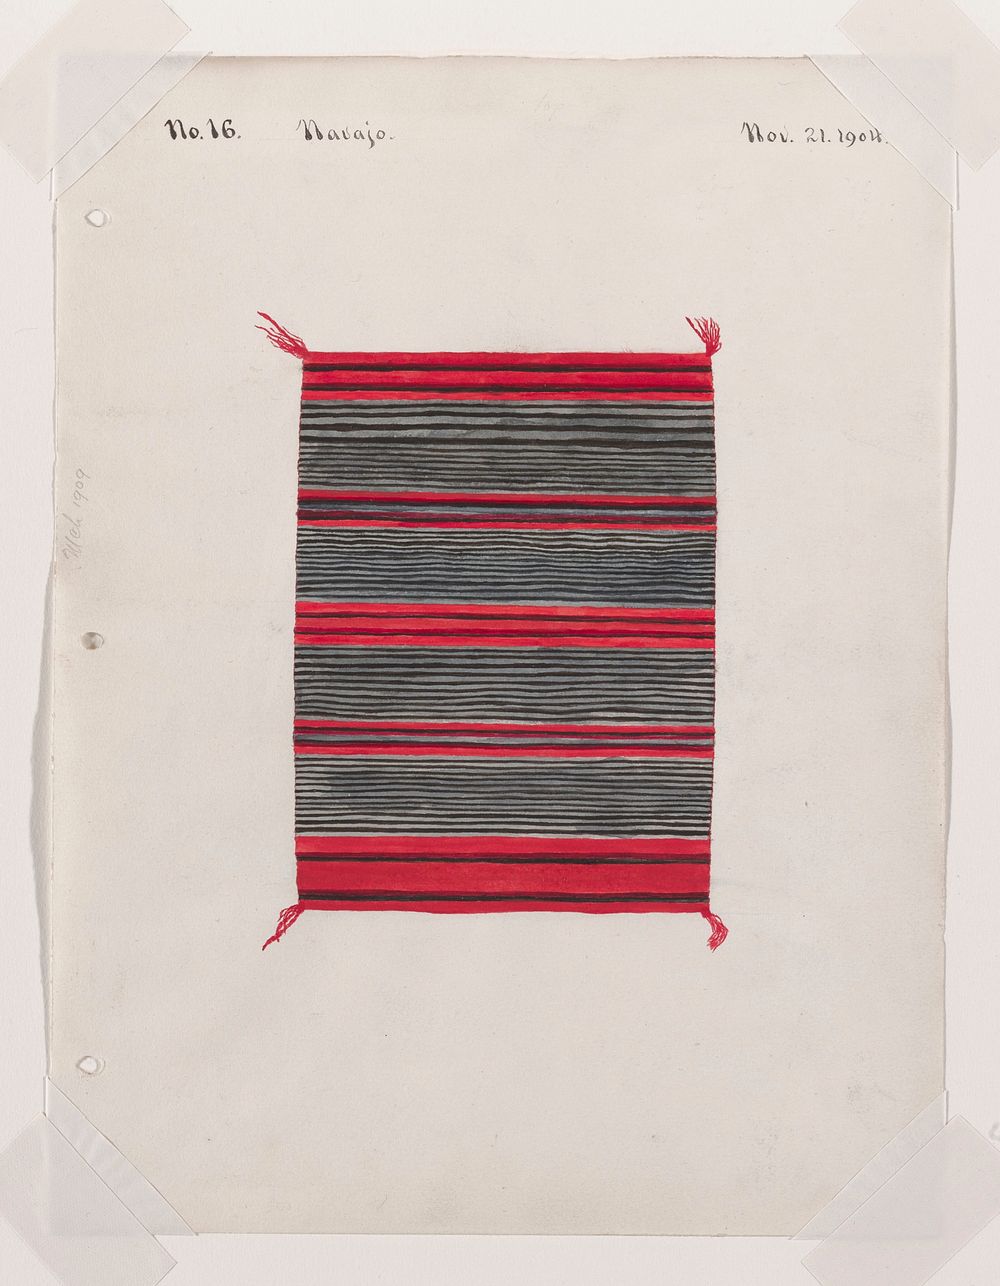 depiction of a textile with close black and gray stripes separated by wider bands of red; red tassels at corners. Original…